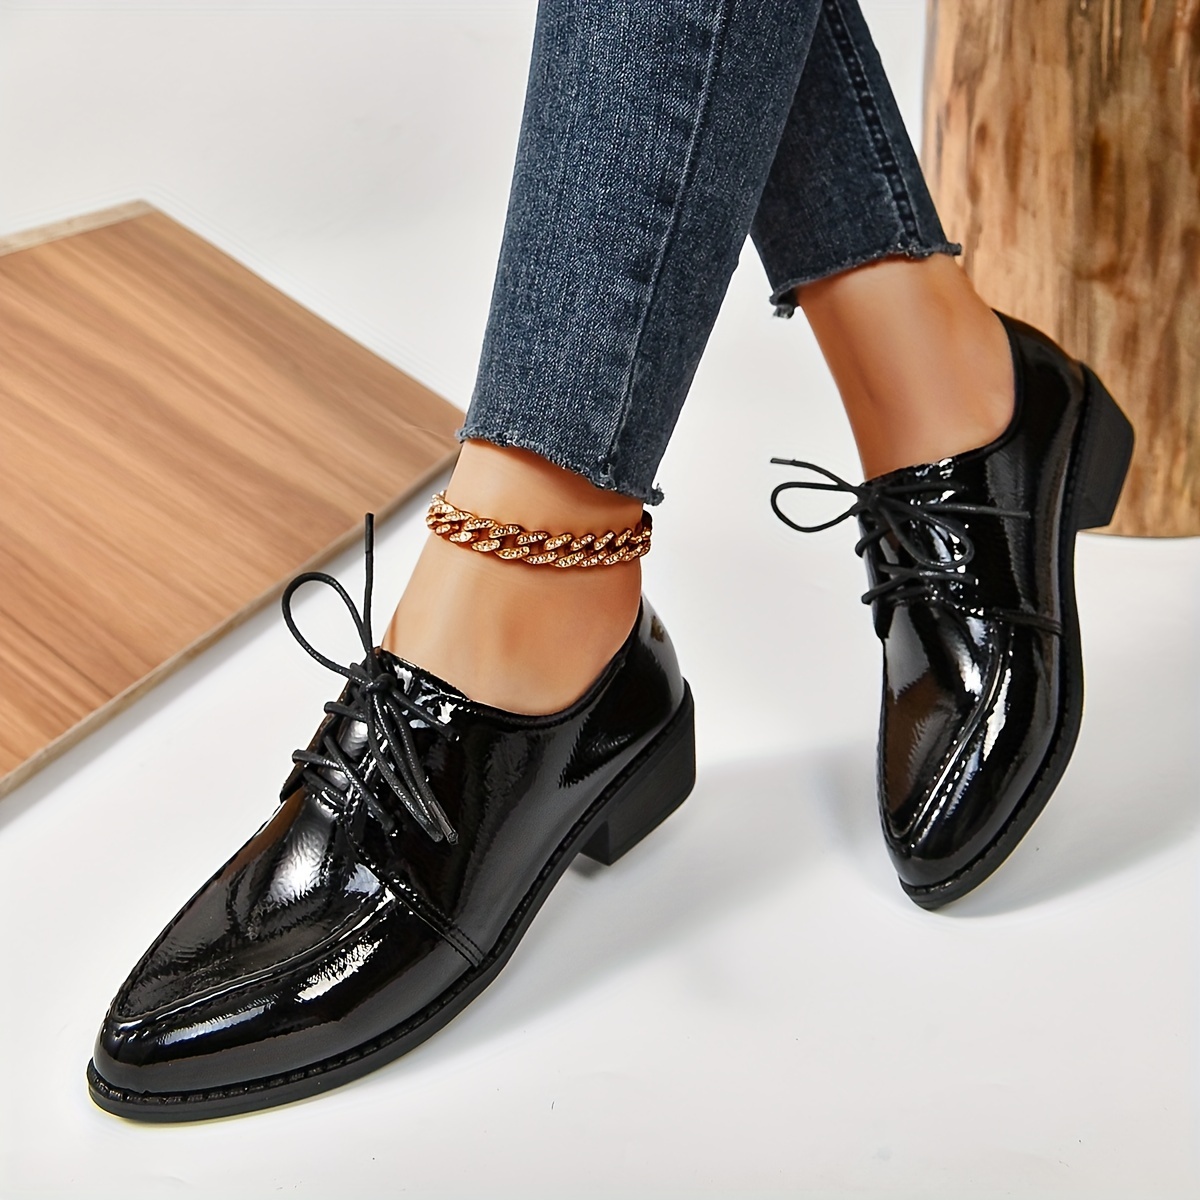 womens solid color chunky heel oxfords fashion lace up point toe dress shoes versatile and comfortable student uniform shoes details 1